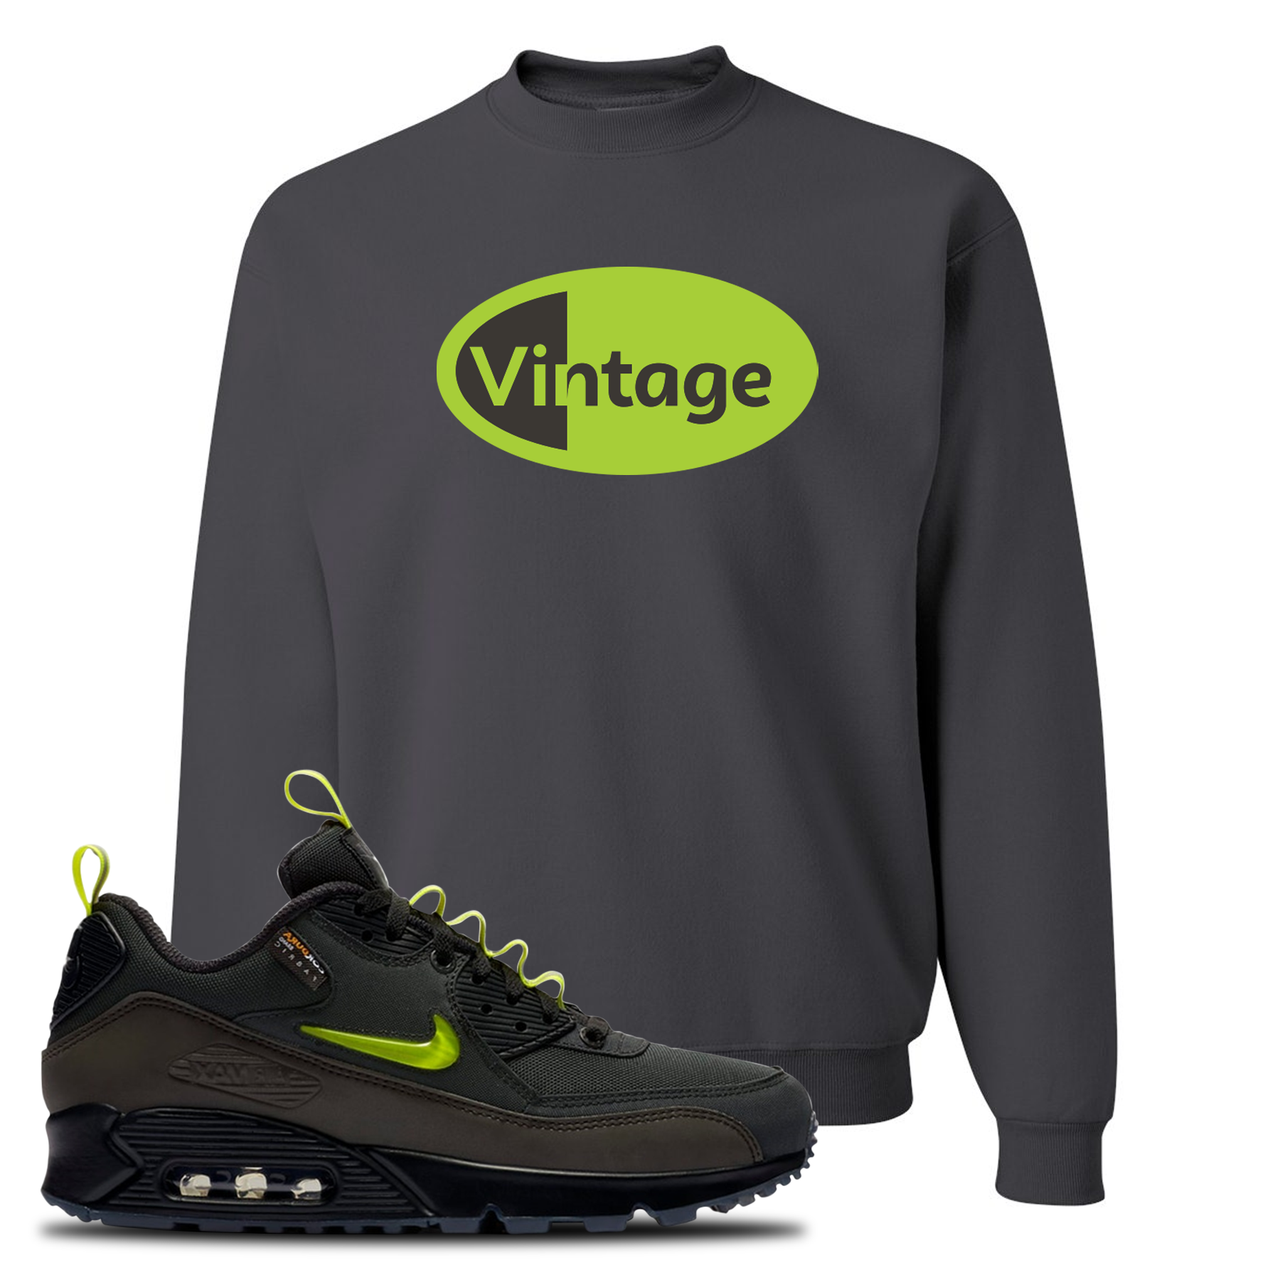 The Basement X Air Max 90 Manchester Vintage Oval Charcoal Gray Sneaker Hook Up Crewneck Sweatshirt